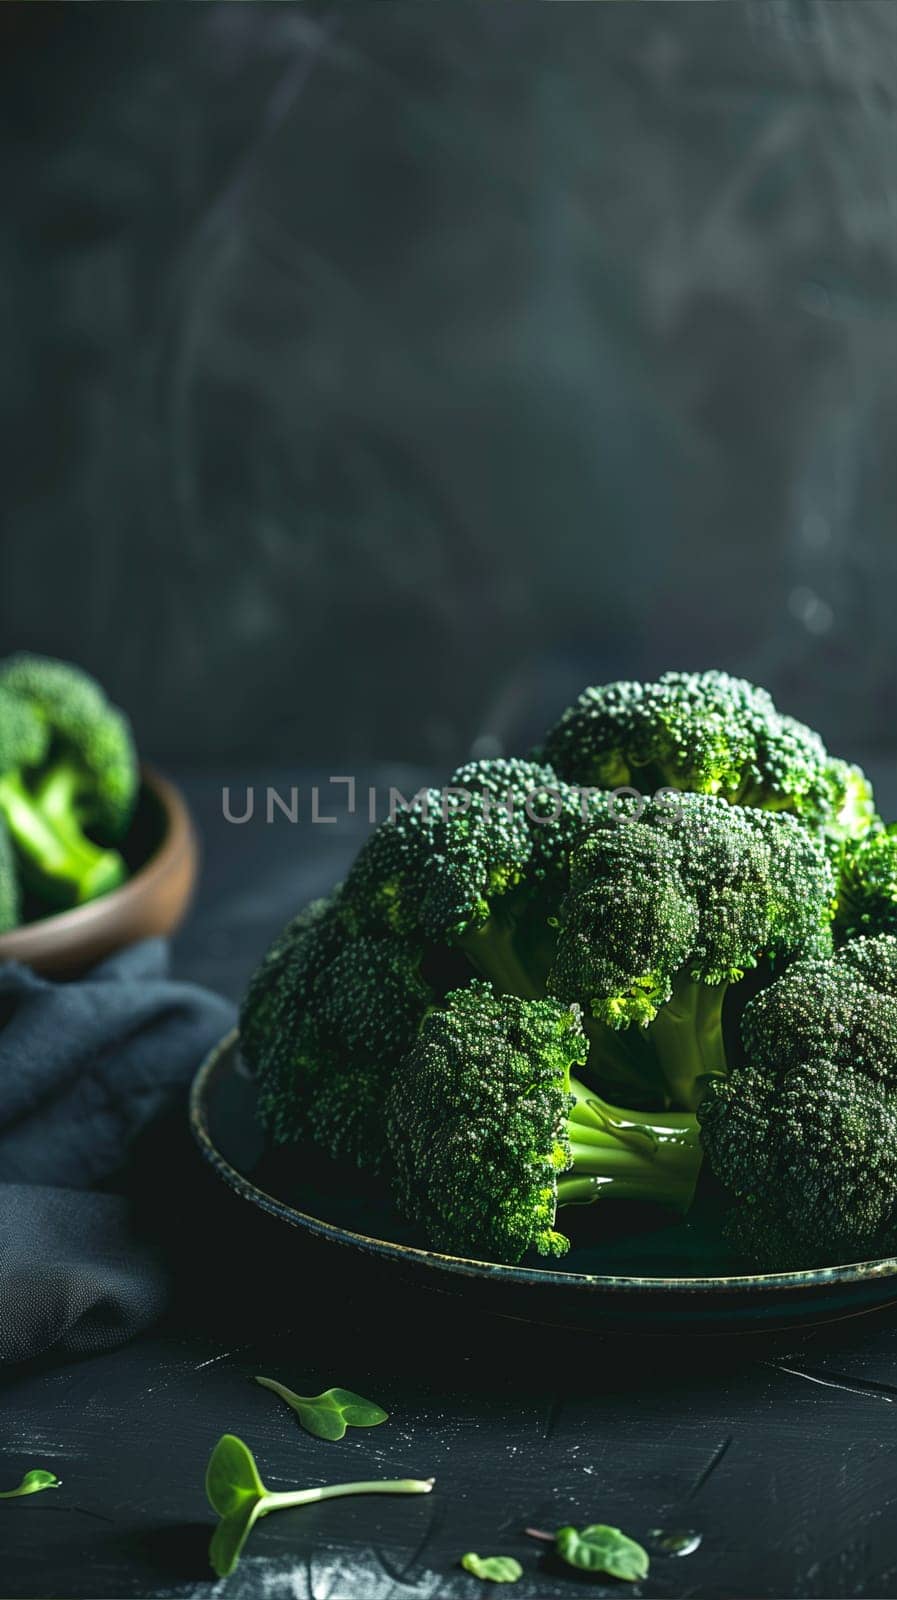 Plate of Broccoli and Bowl of Broccoli on Table by Sd28DimoN_1976